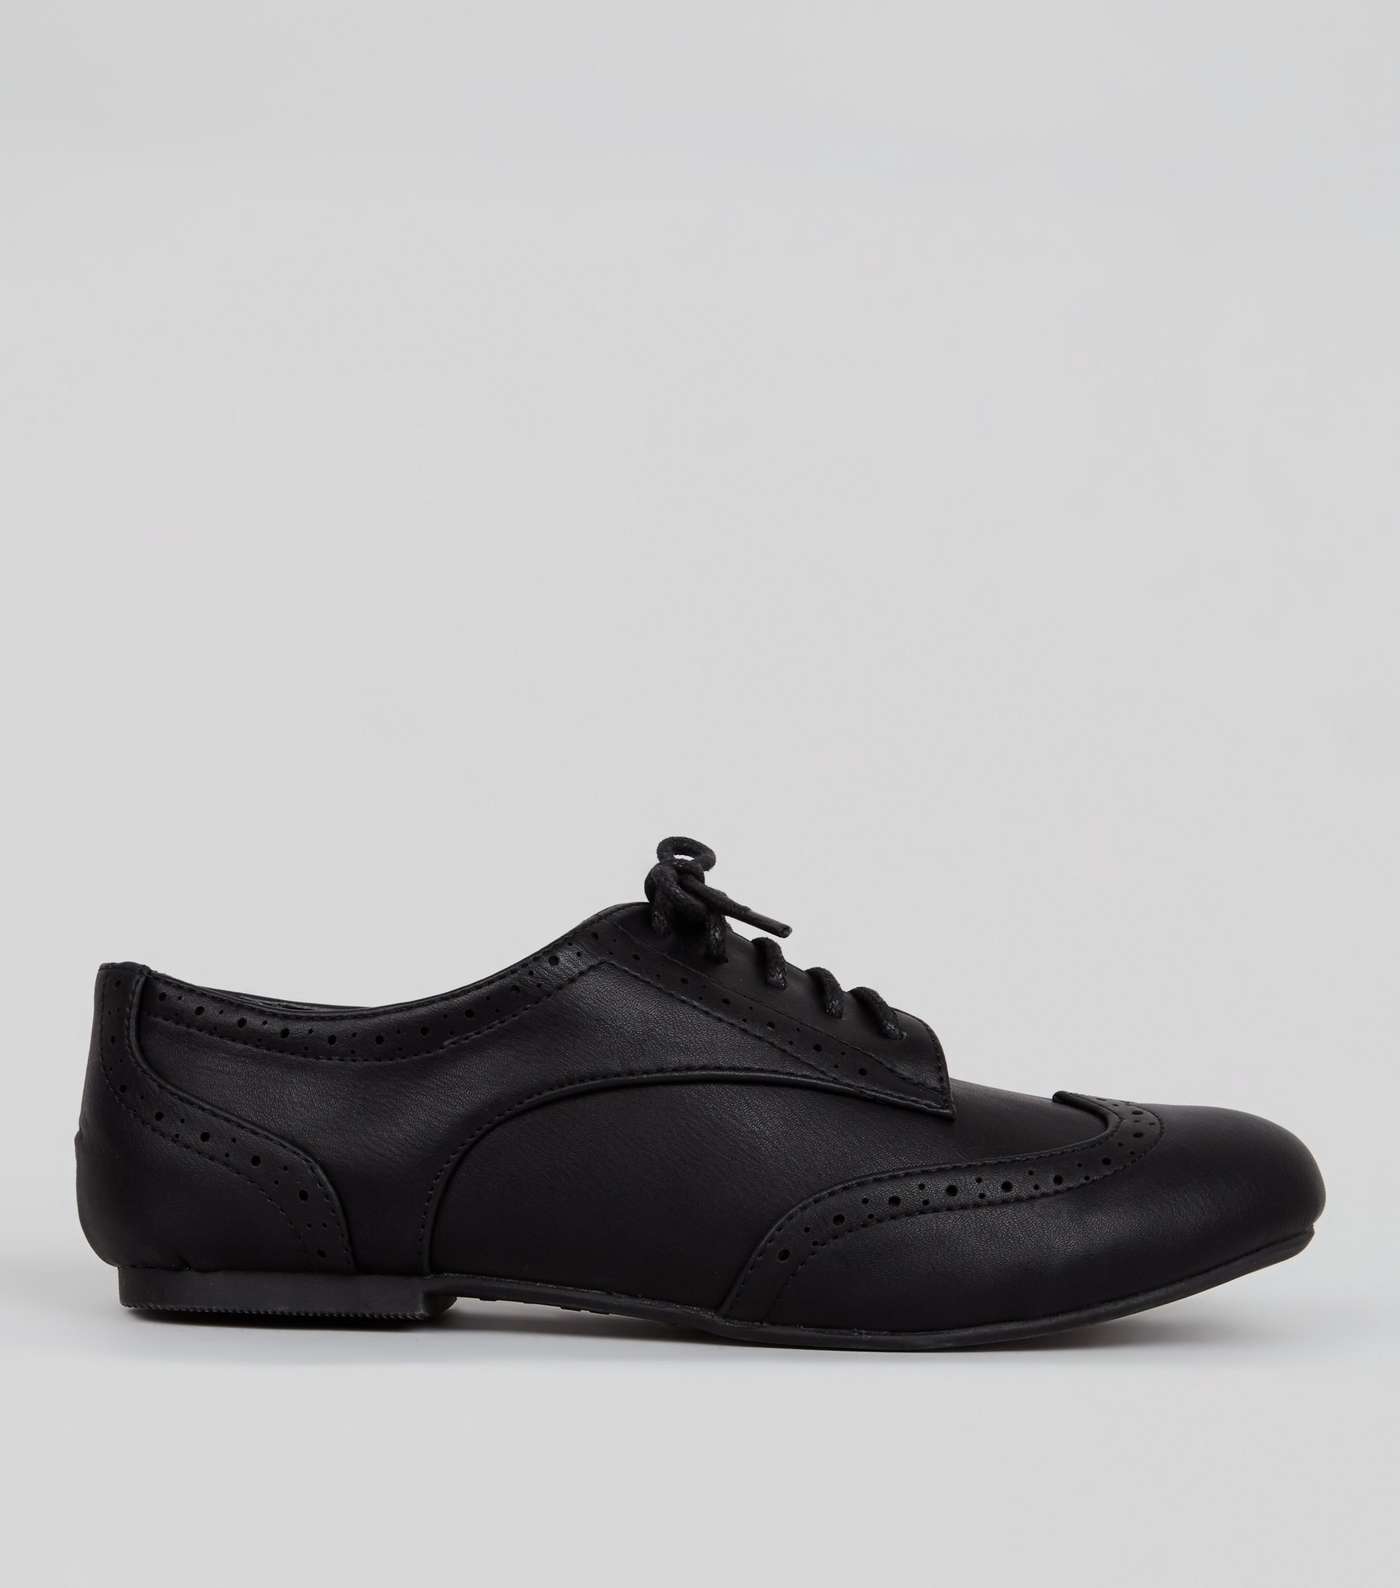 Girls Black Leather-Look Brogues